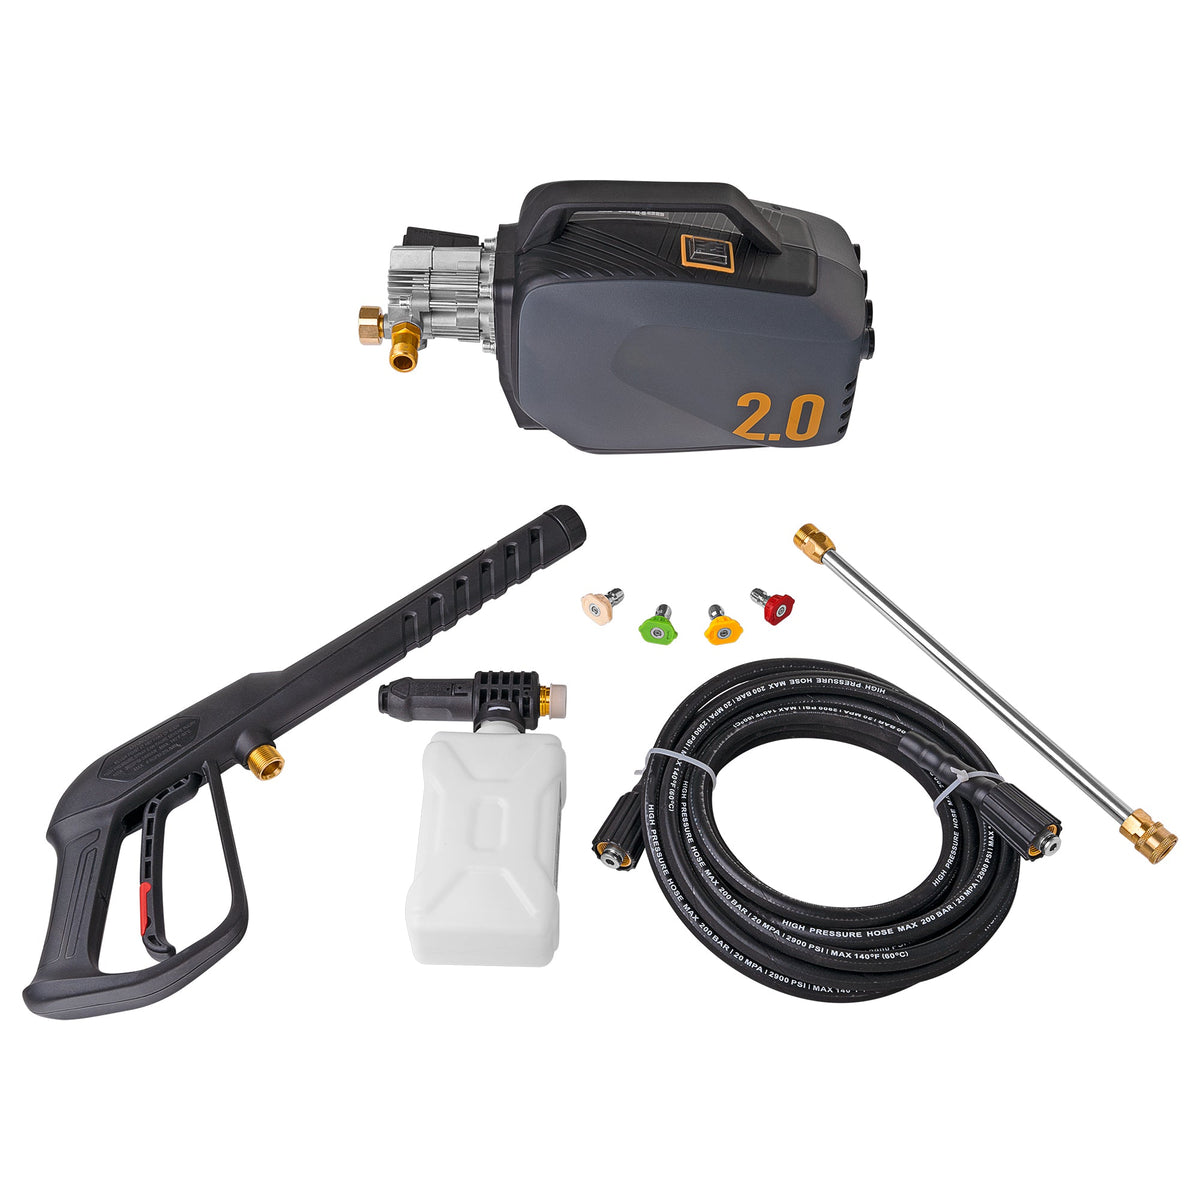 Active 2.0 pressure washer and its accesories such as foam cannon, hose and lance